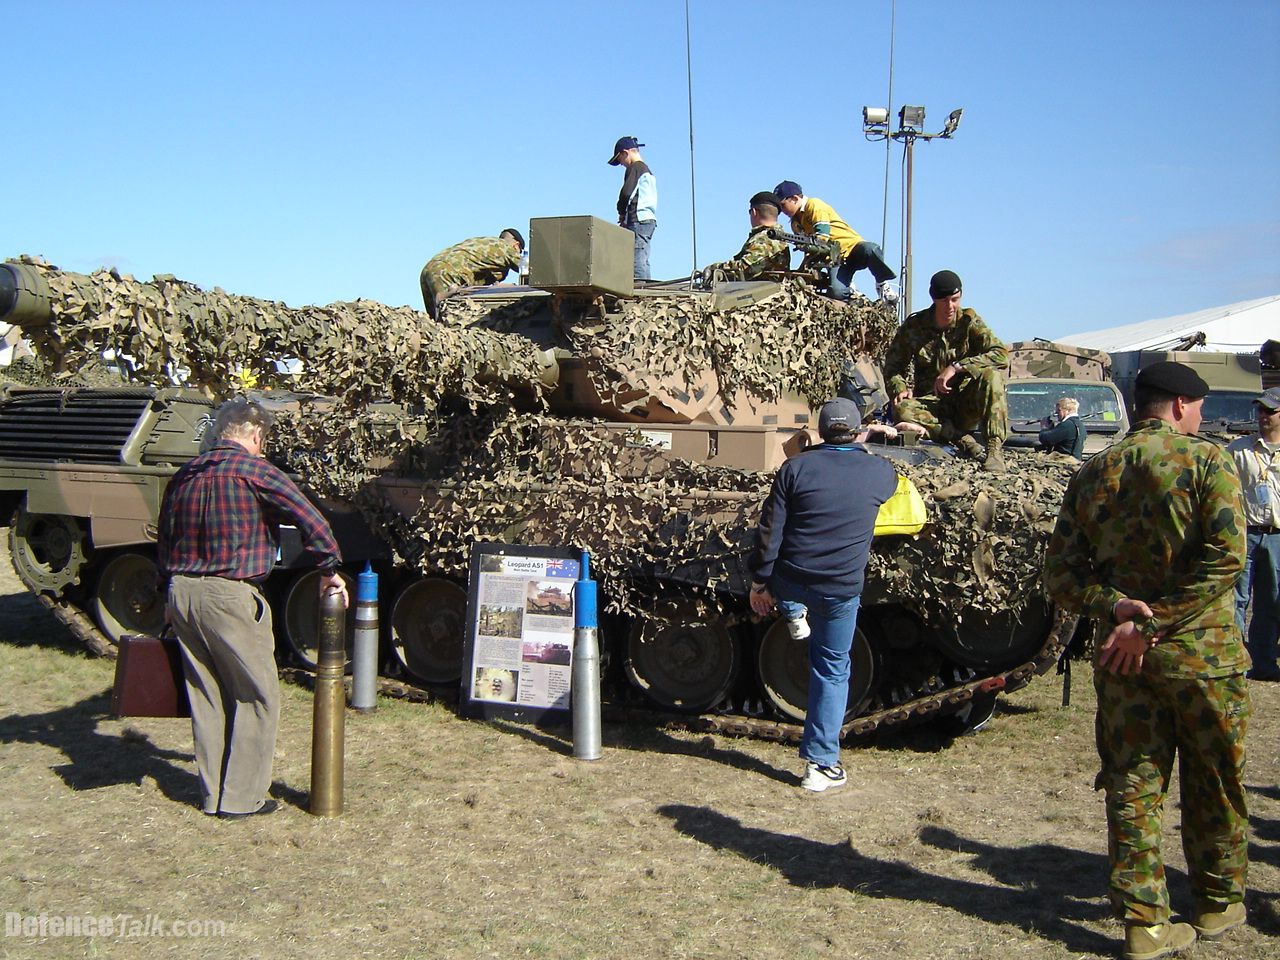 A Leopard AS1 MBT at Avalon Airshow